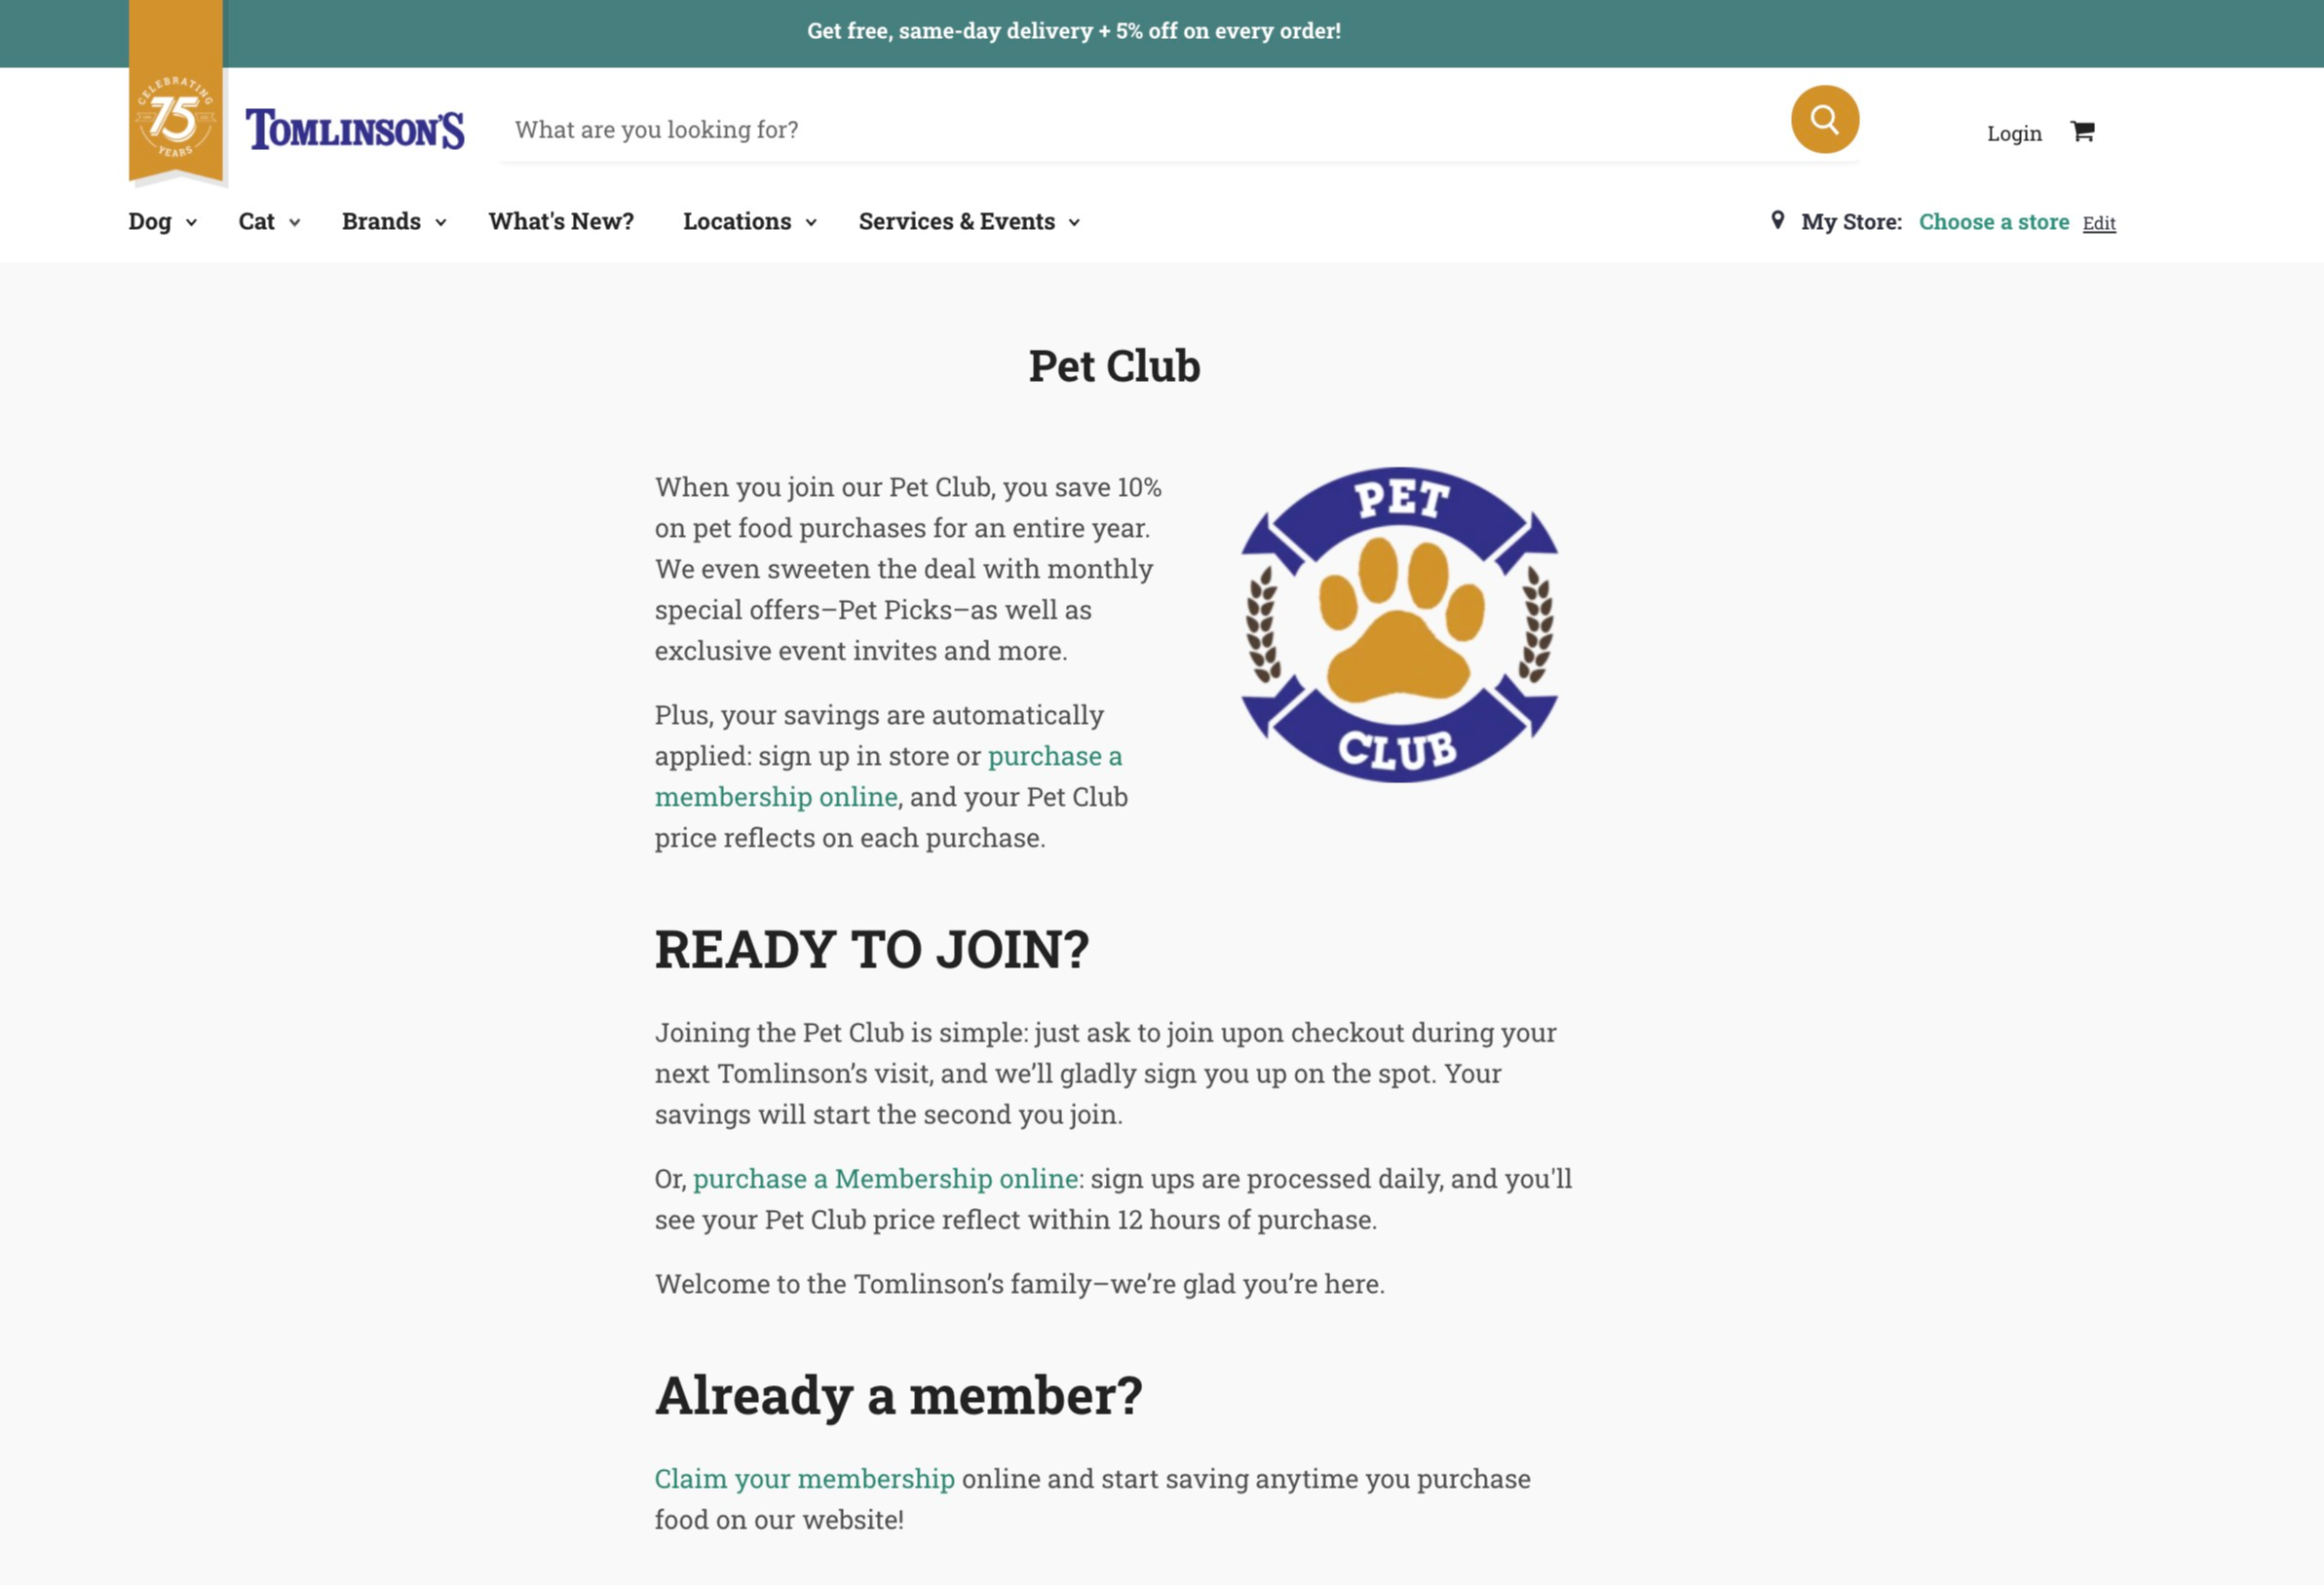 Screenshot of Tomlinson's Pet Club landing page, which shares the benefits of joining their membership program.